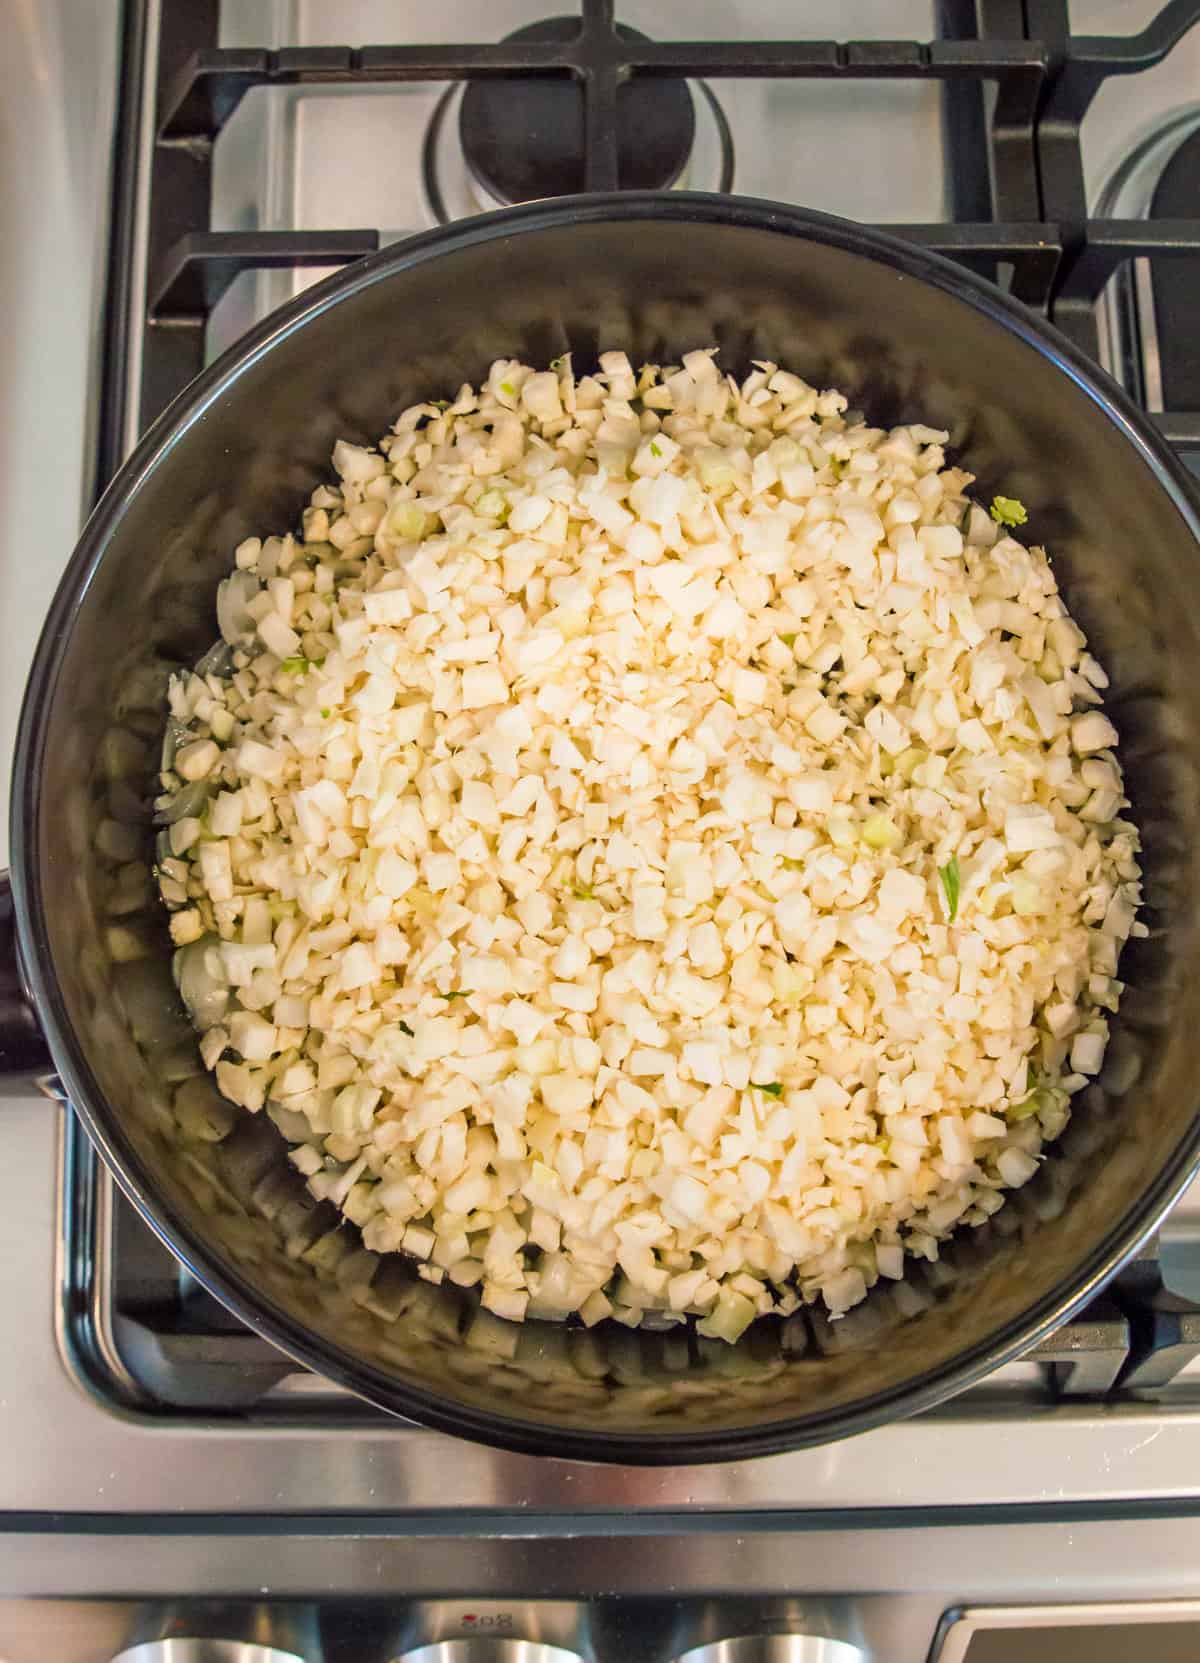 A pan full of cauliflower rice on the stovetop.